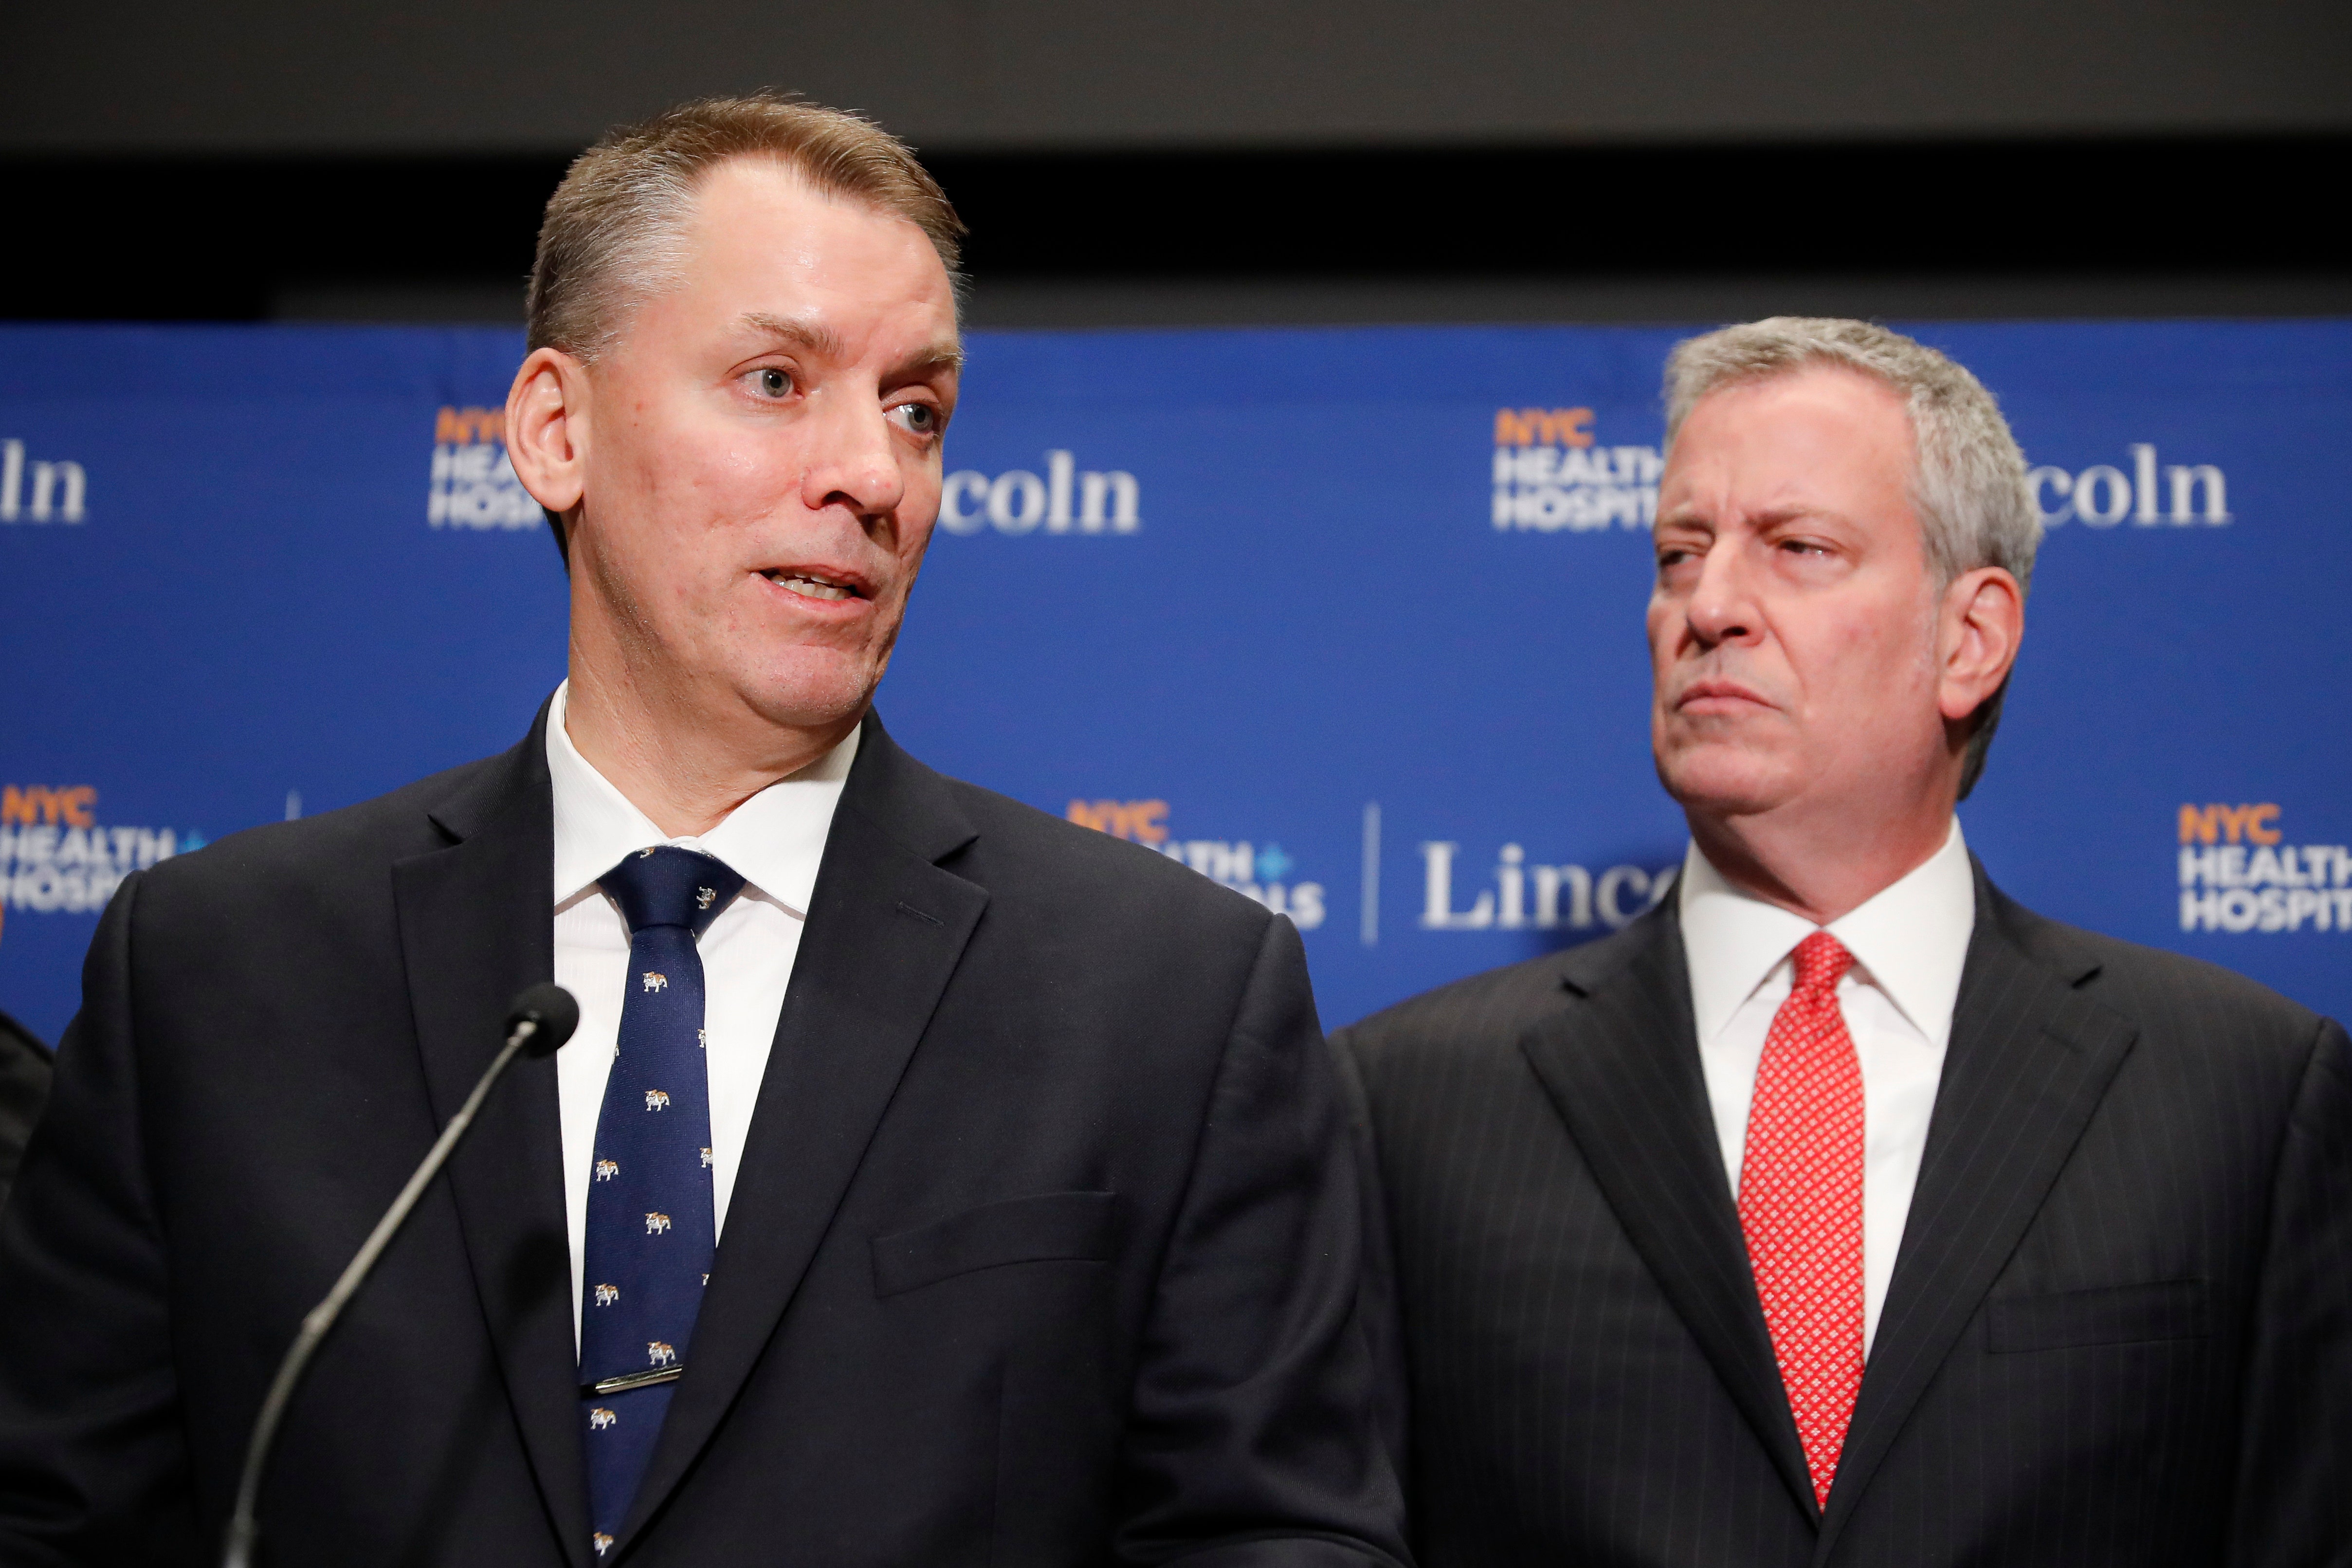 Crime leads voter concerns as NYC mayoral primary approaches